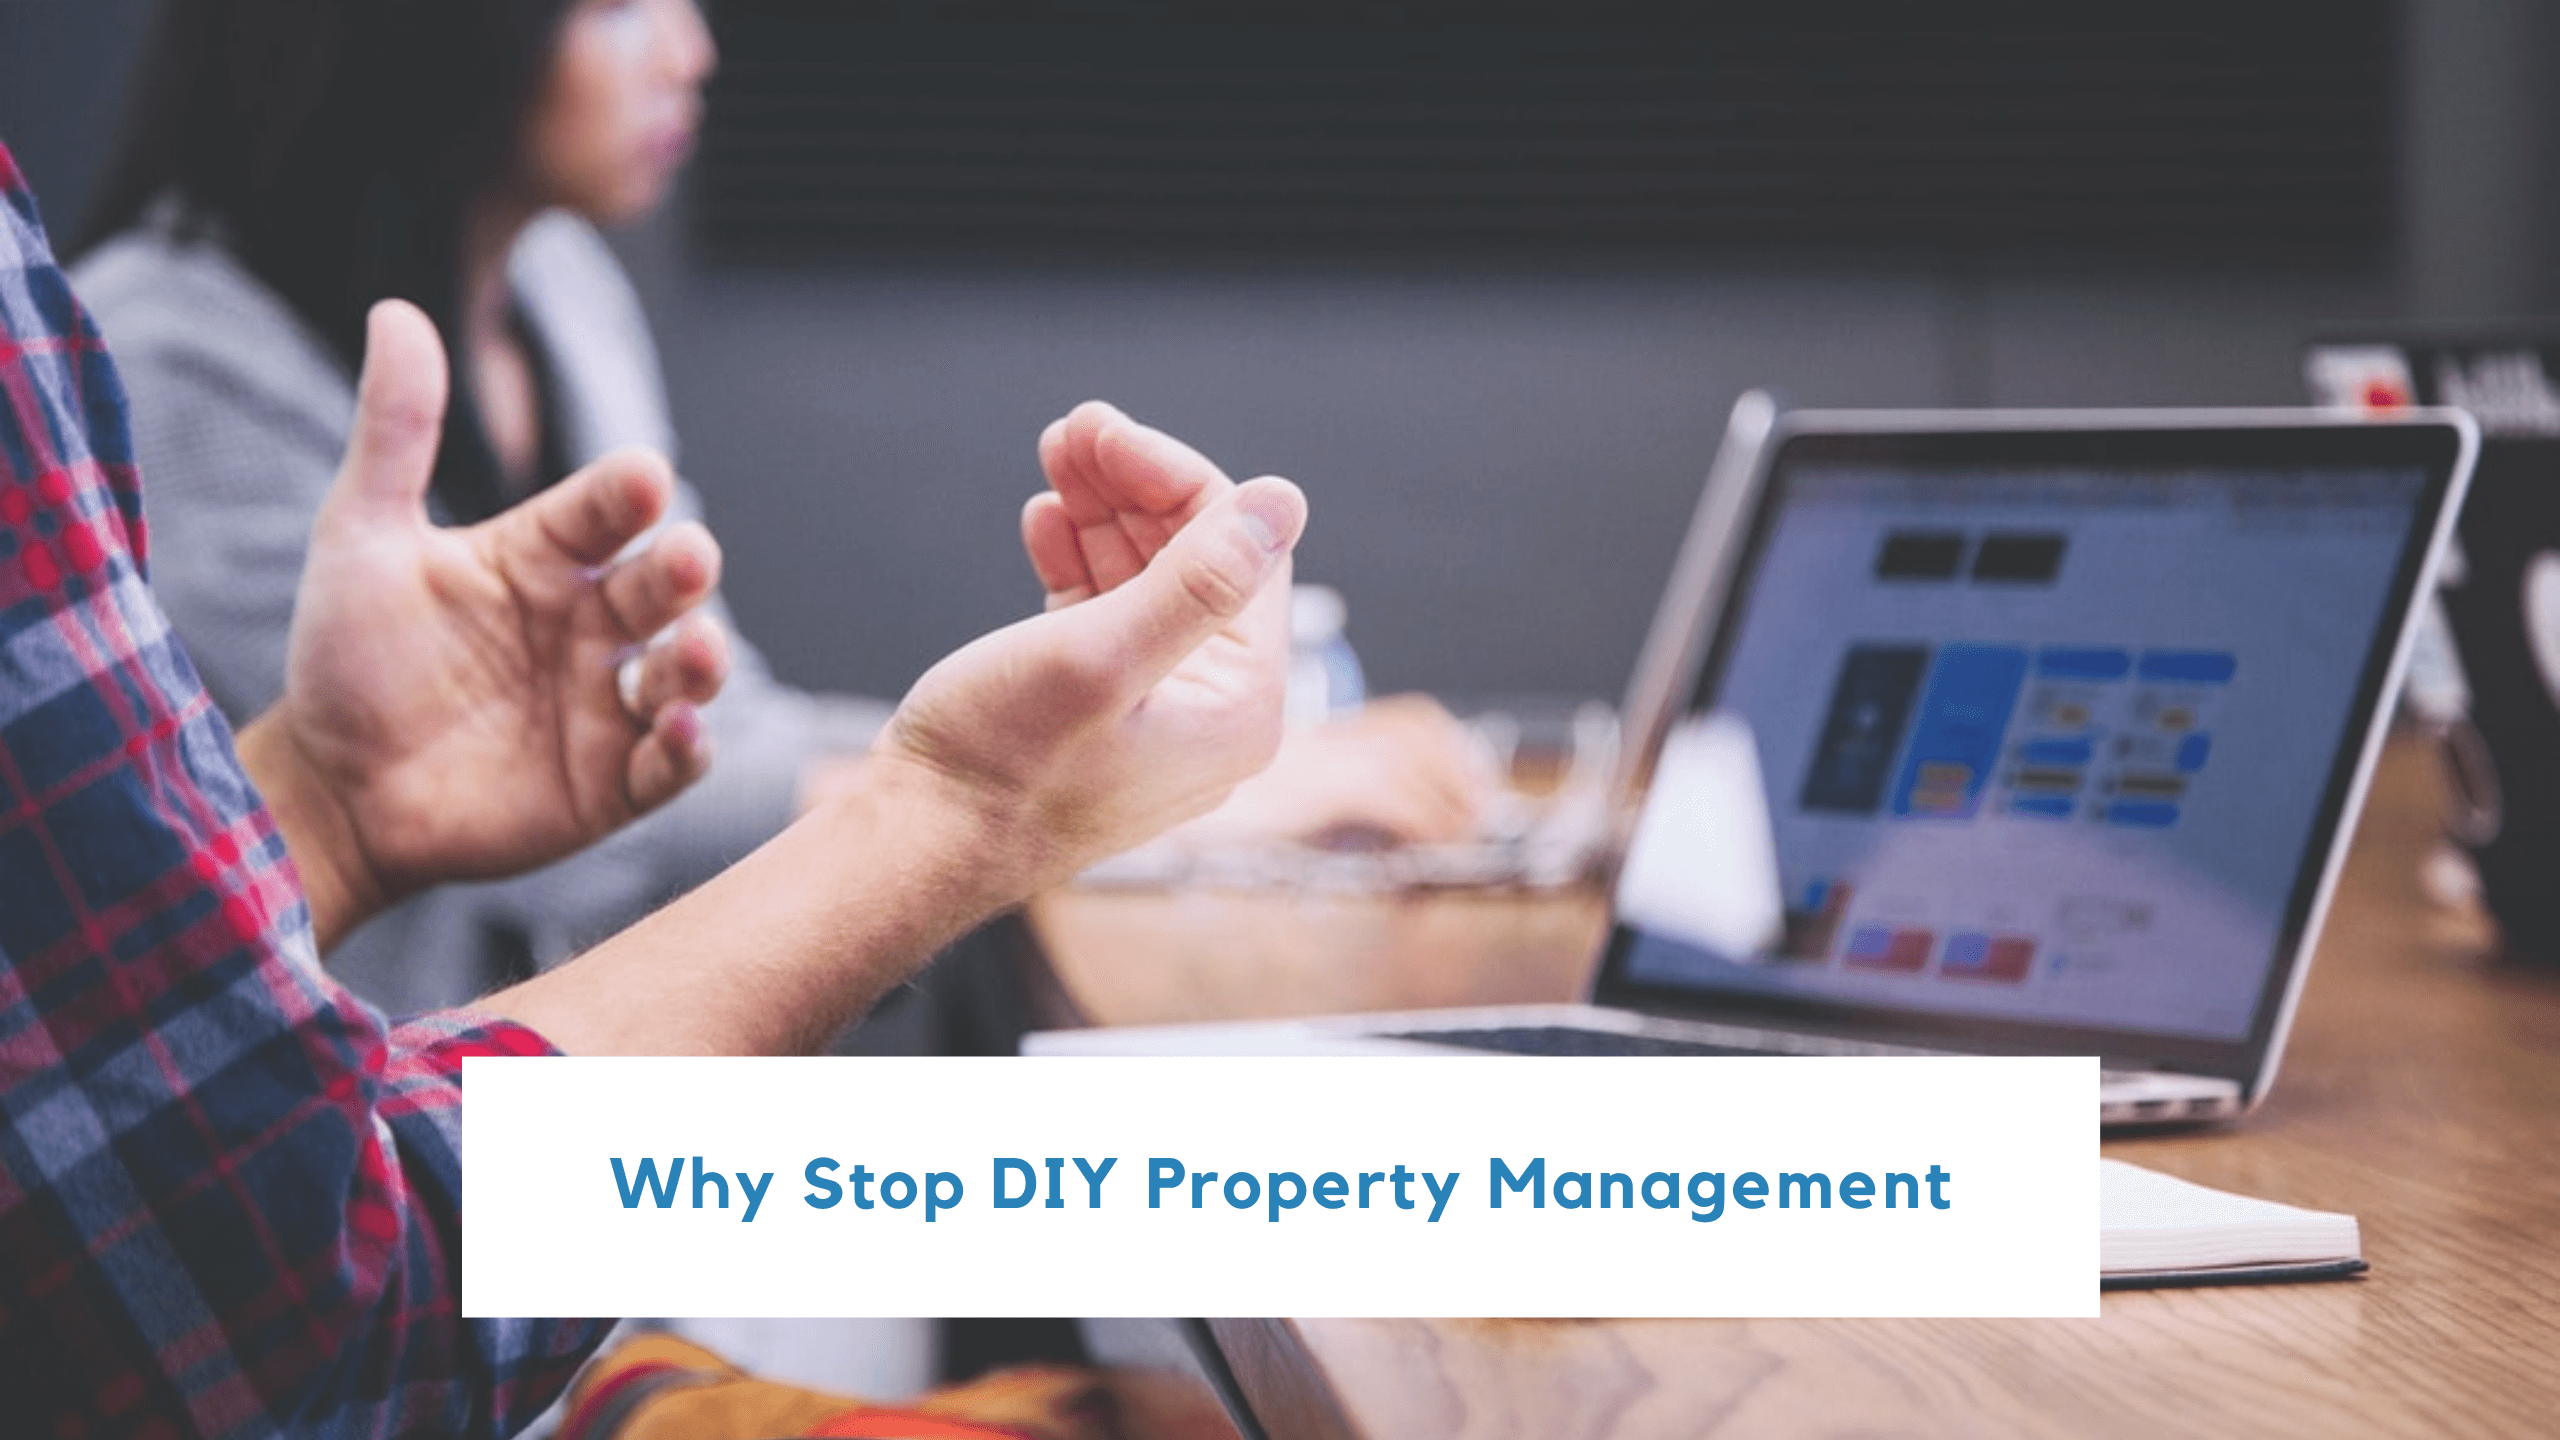 What You Gain When You Stop DIY Property Management | Killeen Rental Owner Advice